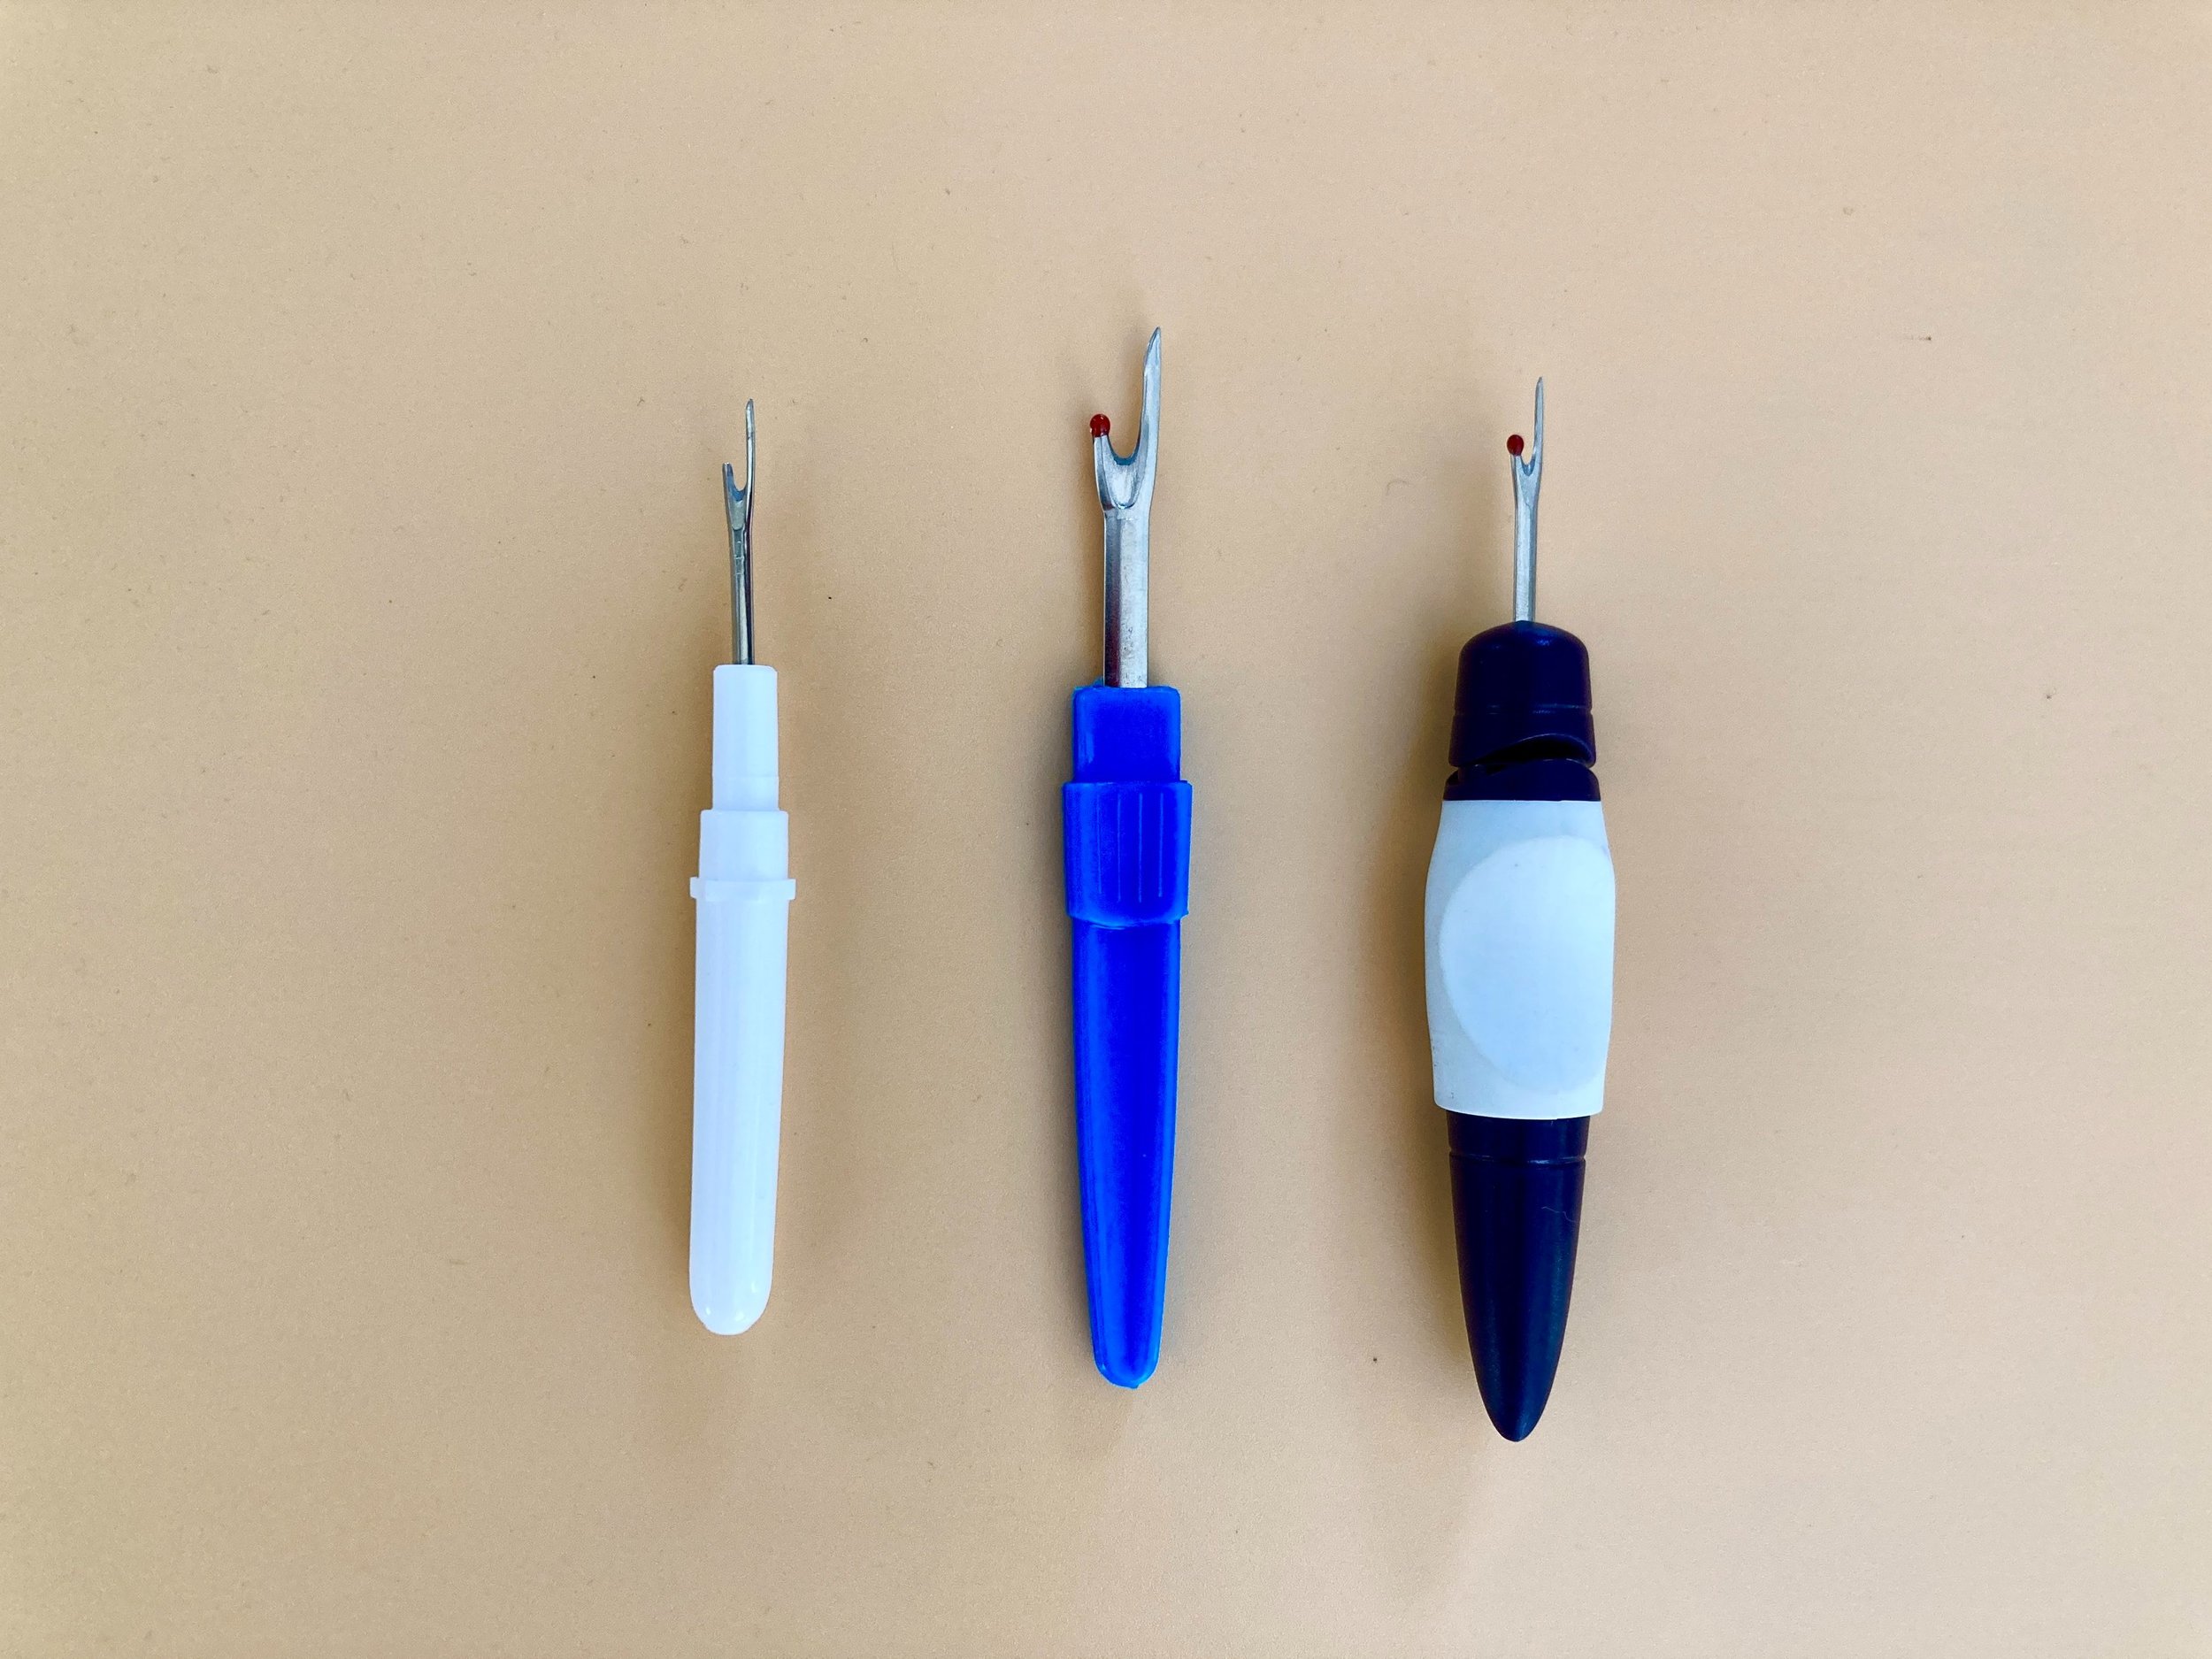 How to Use a Seam Ripper 